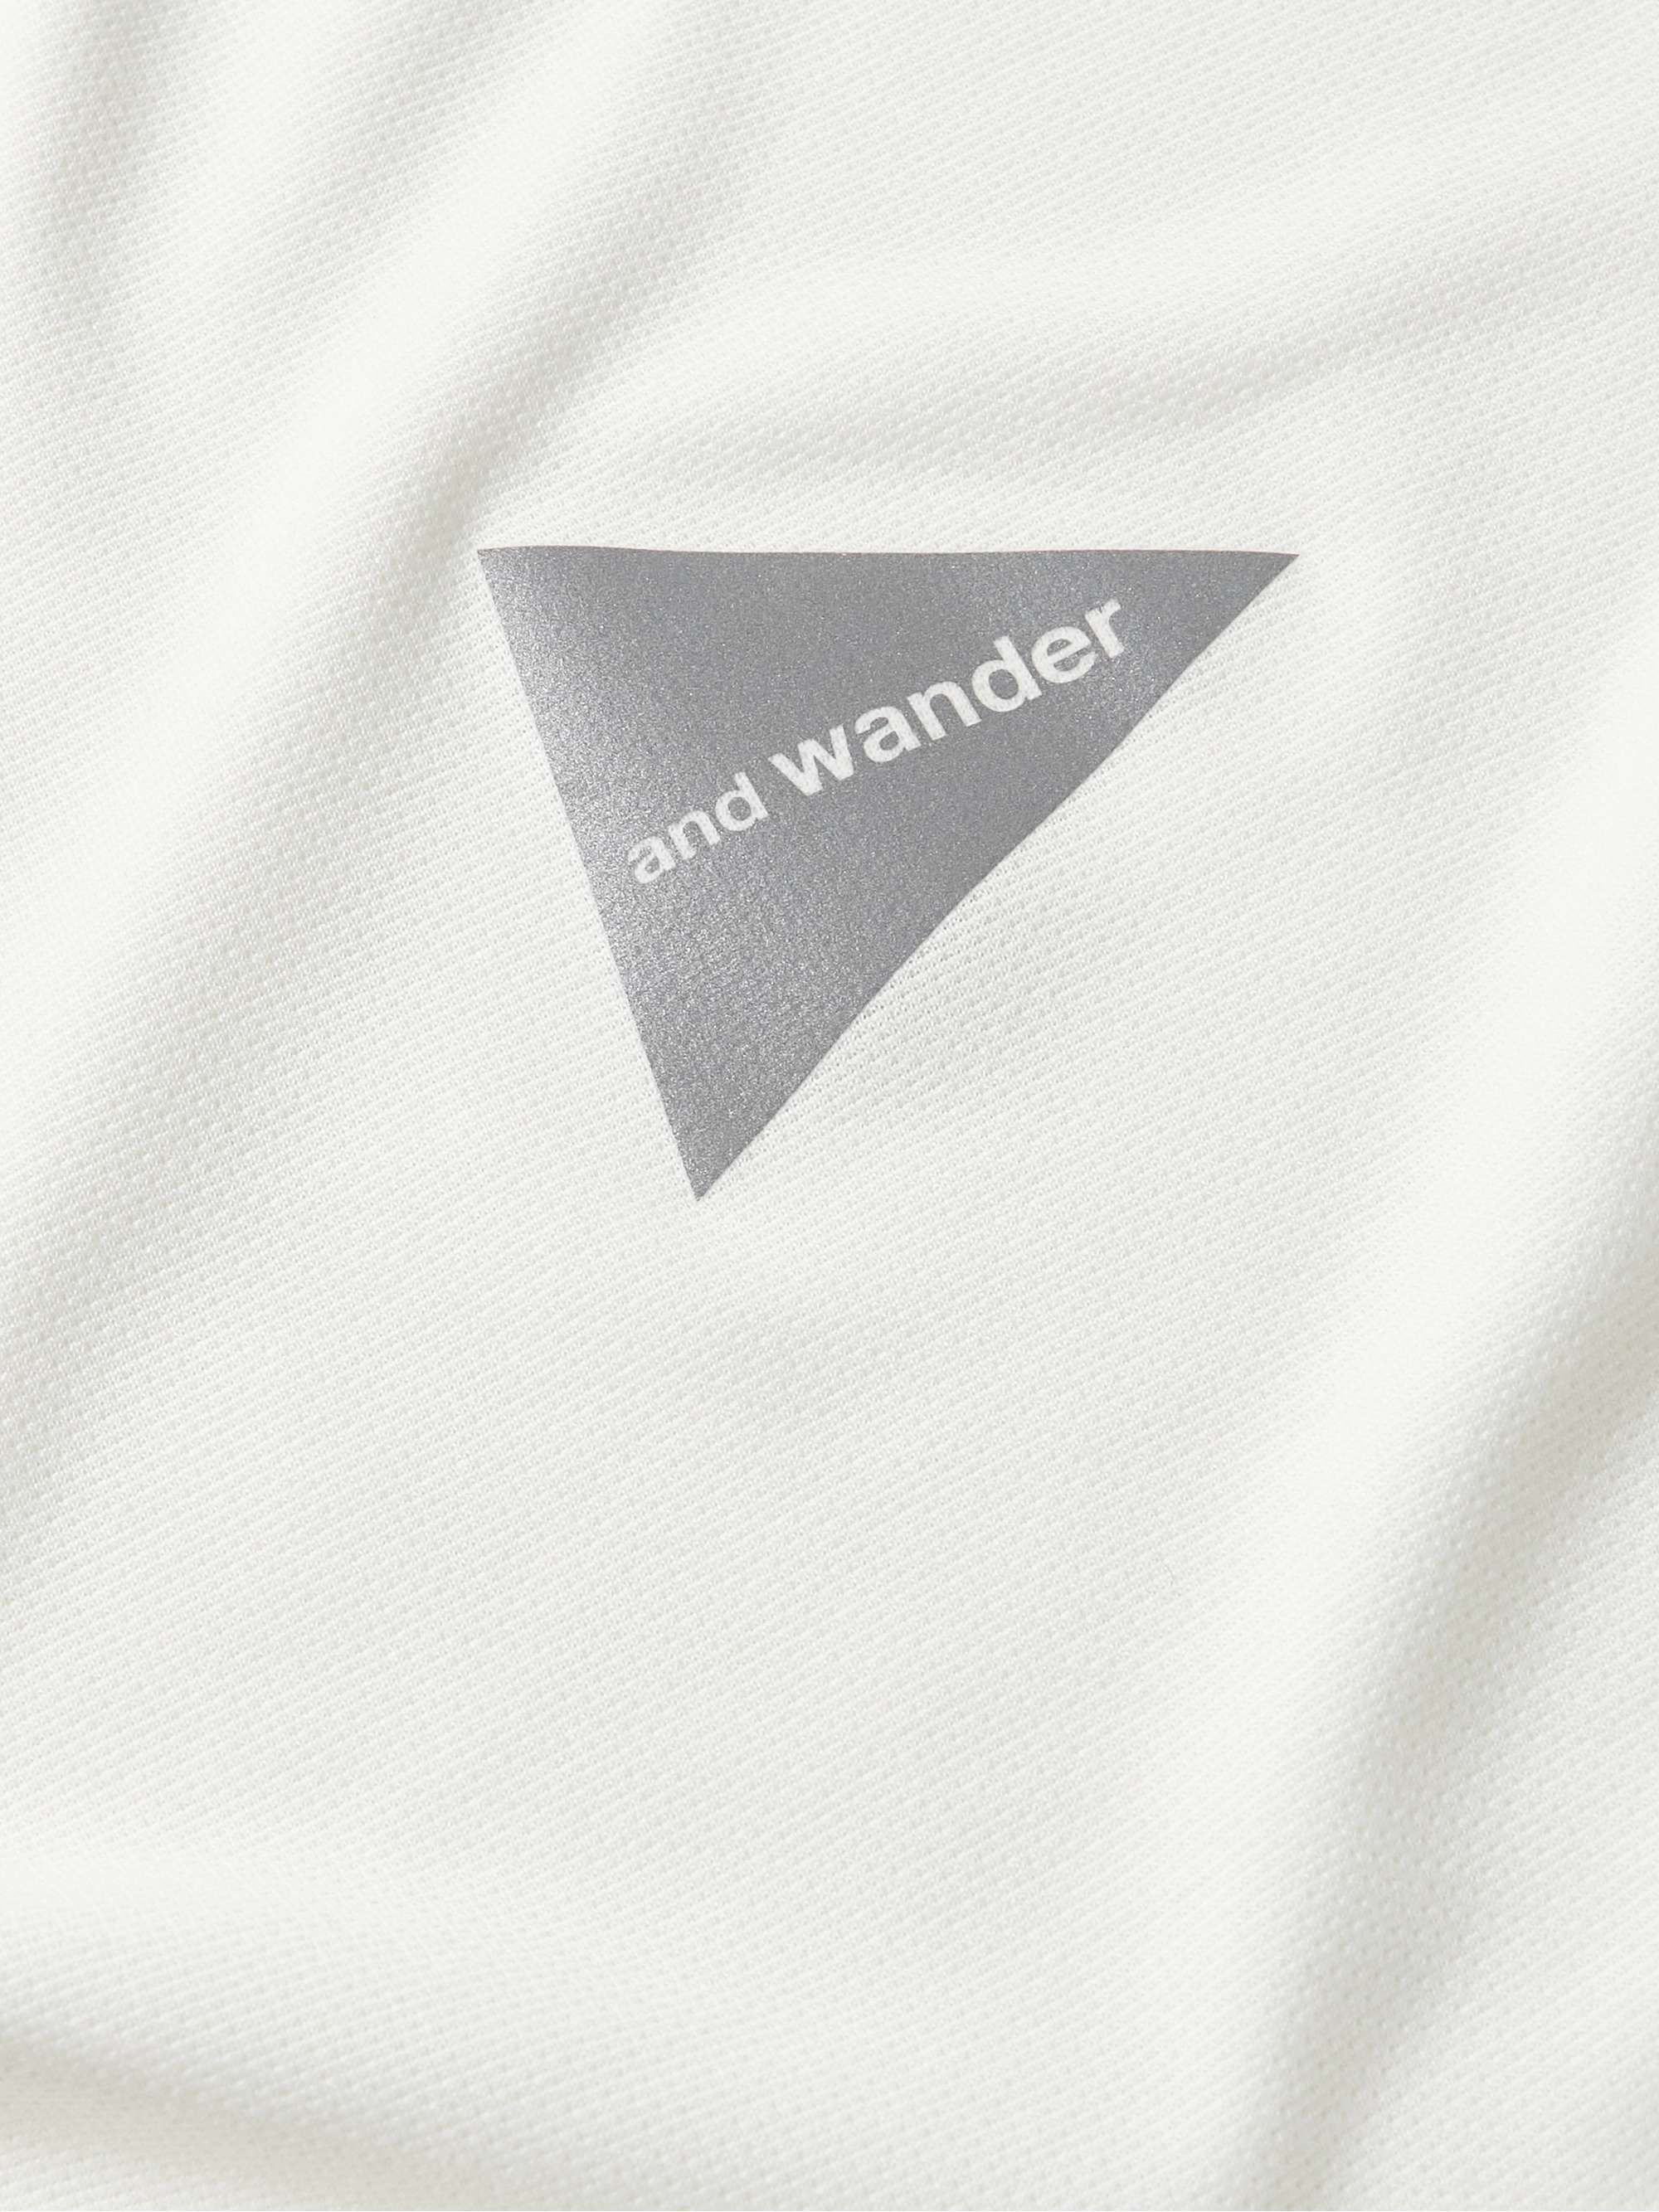 AND WANDER Polartec Power Dry T-Shirt